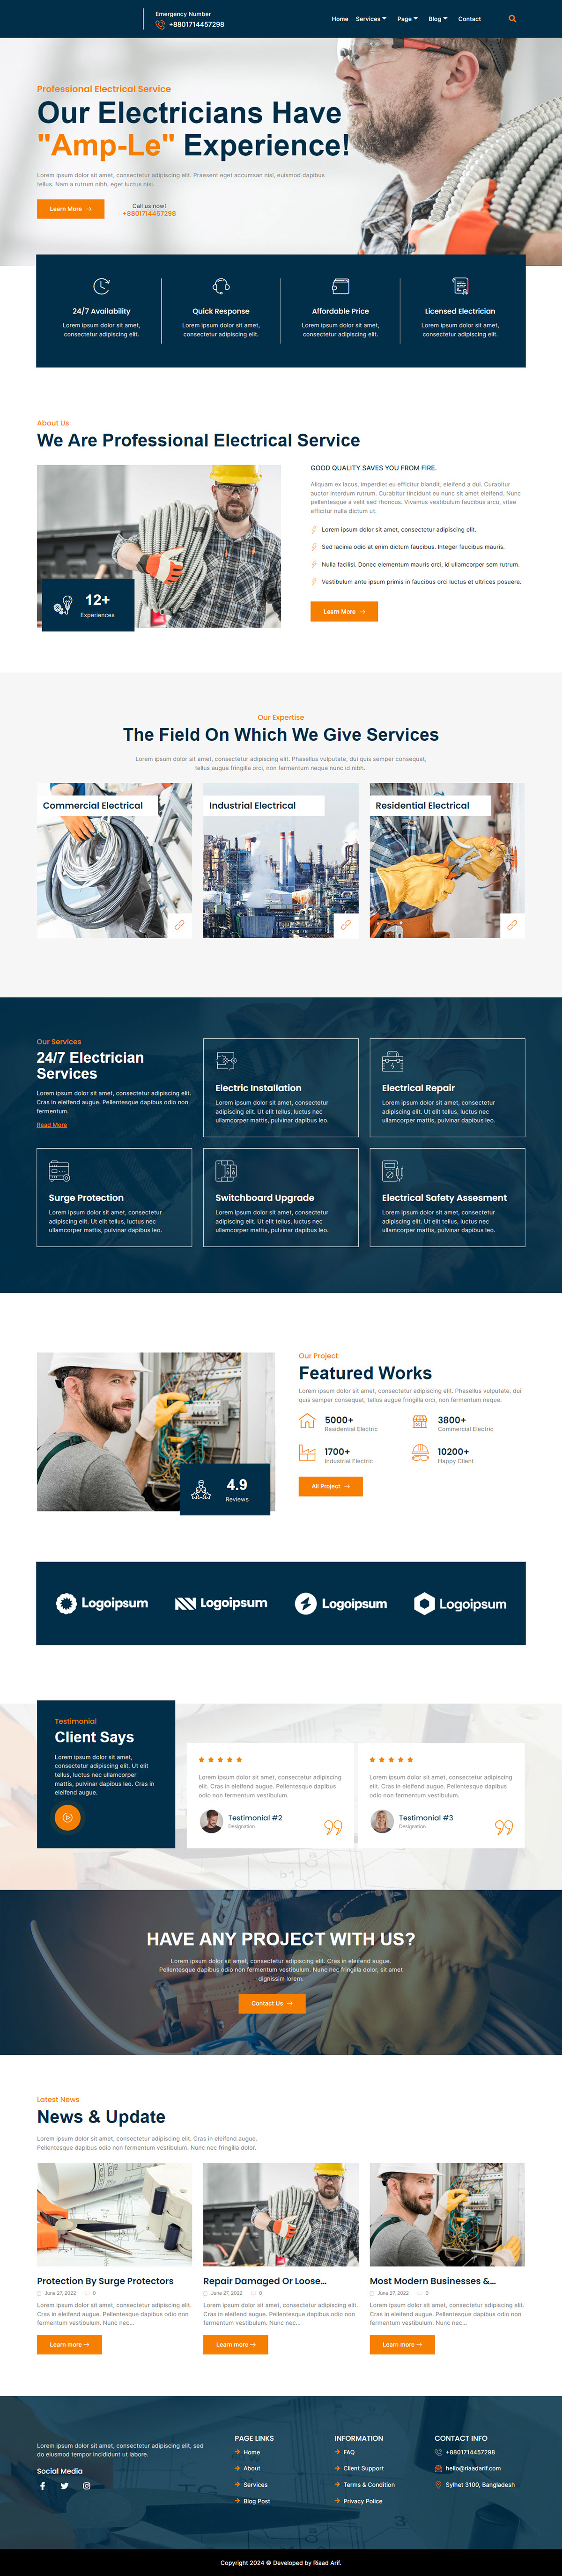 Professional Electrical Services Website rendition image